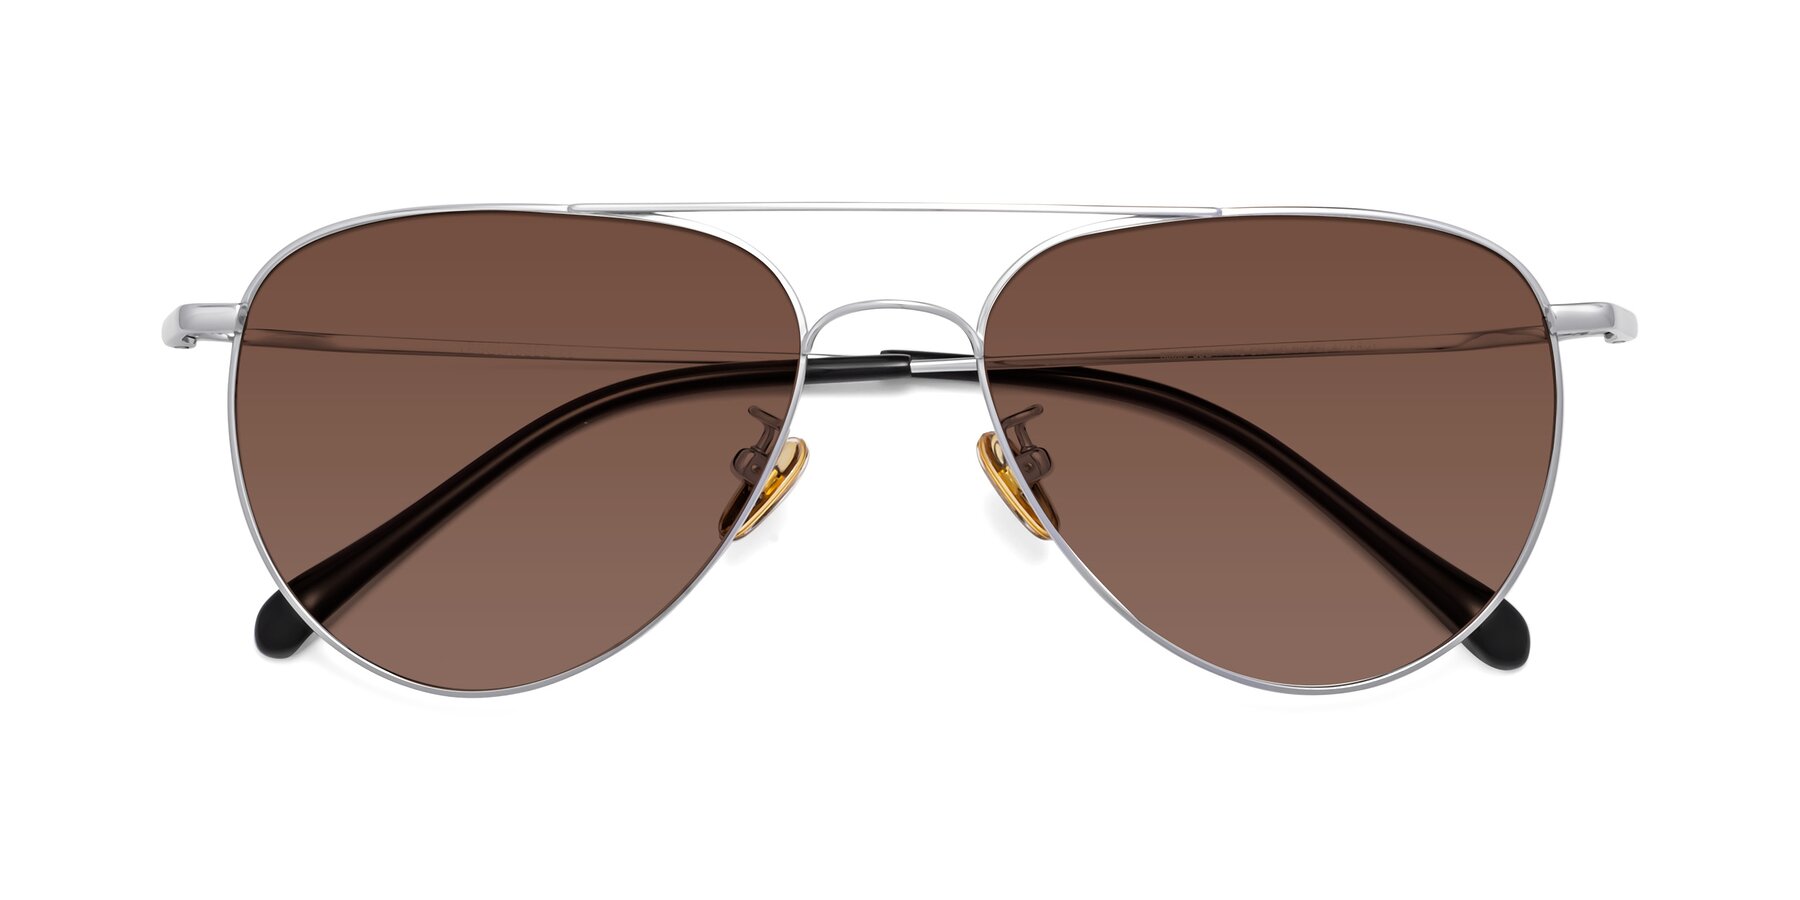 Gold Classic Titanium Aviator Tinted Sunglasses with Light Brown Sunwear  Lenses - Hindley